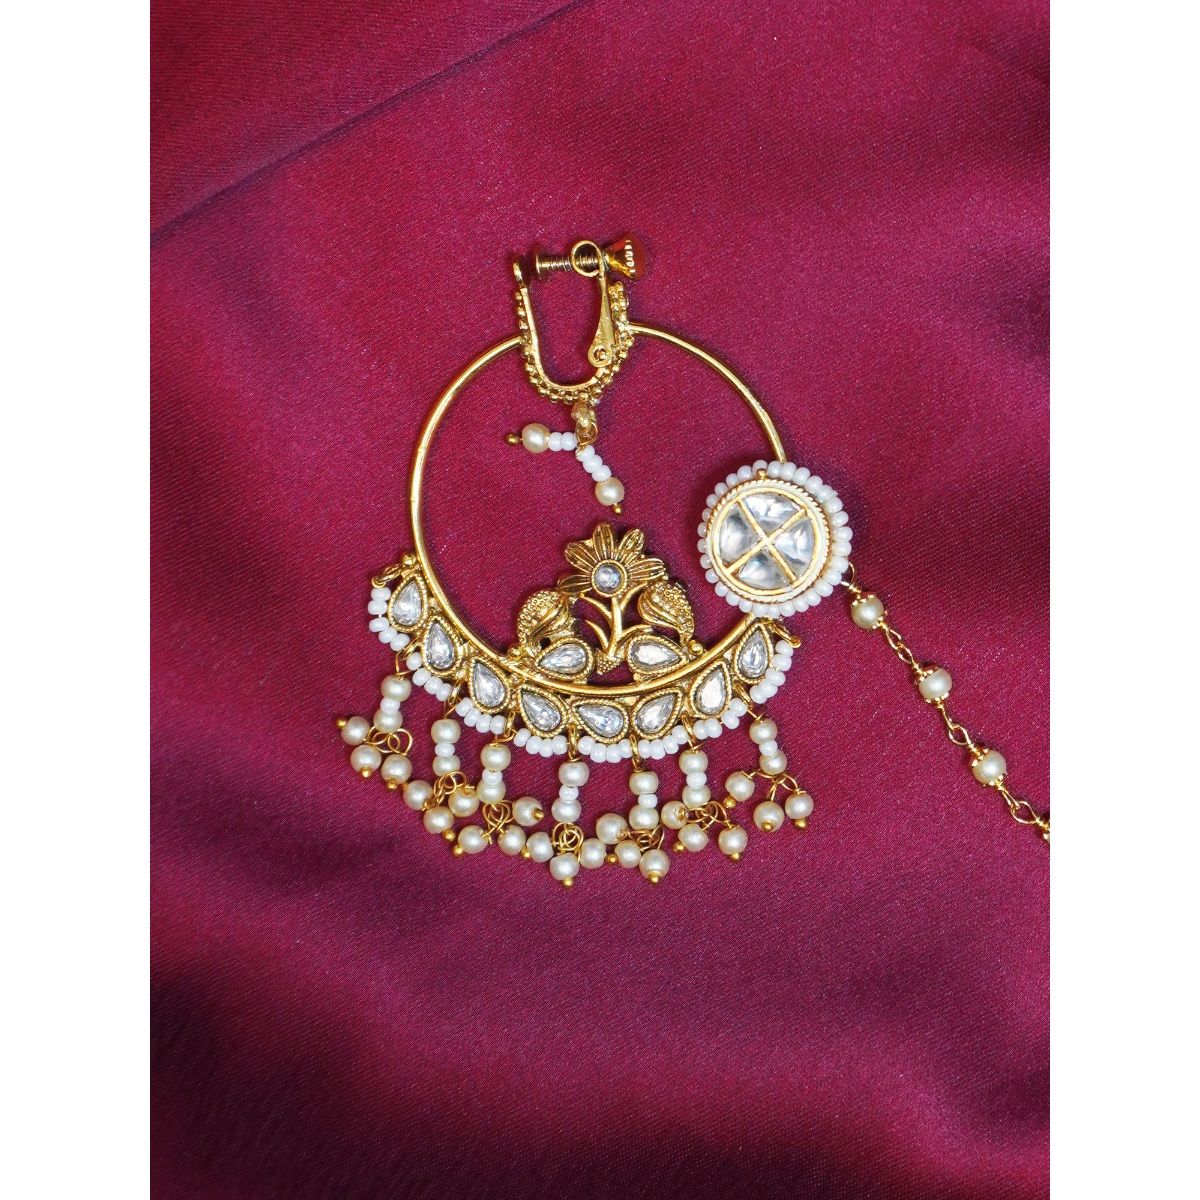 Buy TAMMANA Jewellery 18kt (200 MG) Gold Nose Ring for Women & Girls Gold/Jewellery  Perfect Best/Gold Nose pin/Sania Mirza for tammana Jewellery Look is  Perfect Beautiful at Amazon.in